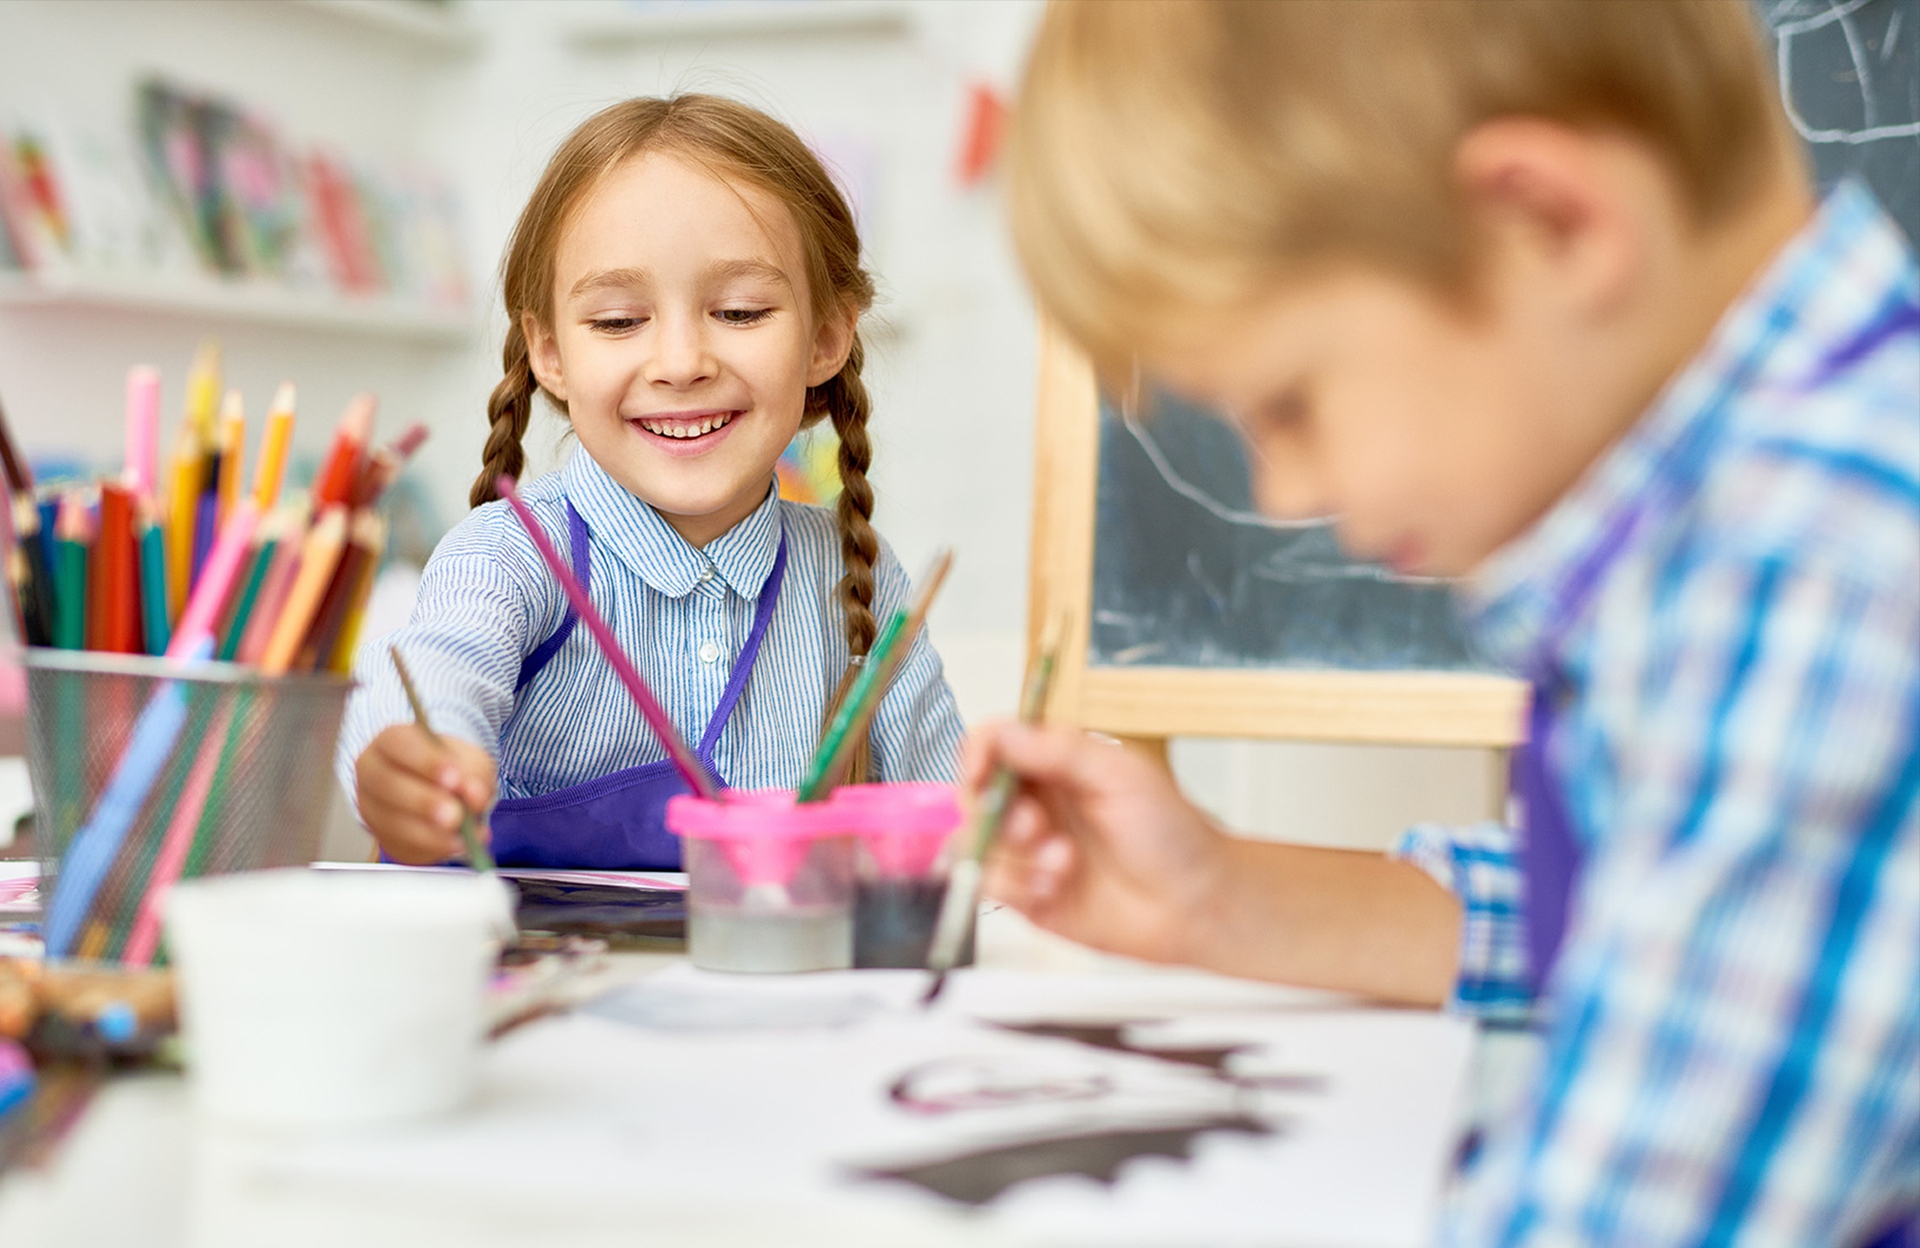 Early learners boy and girl at table smiling and painting